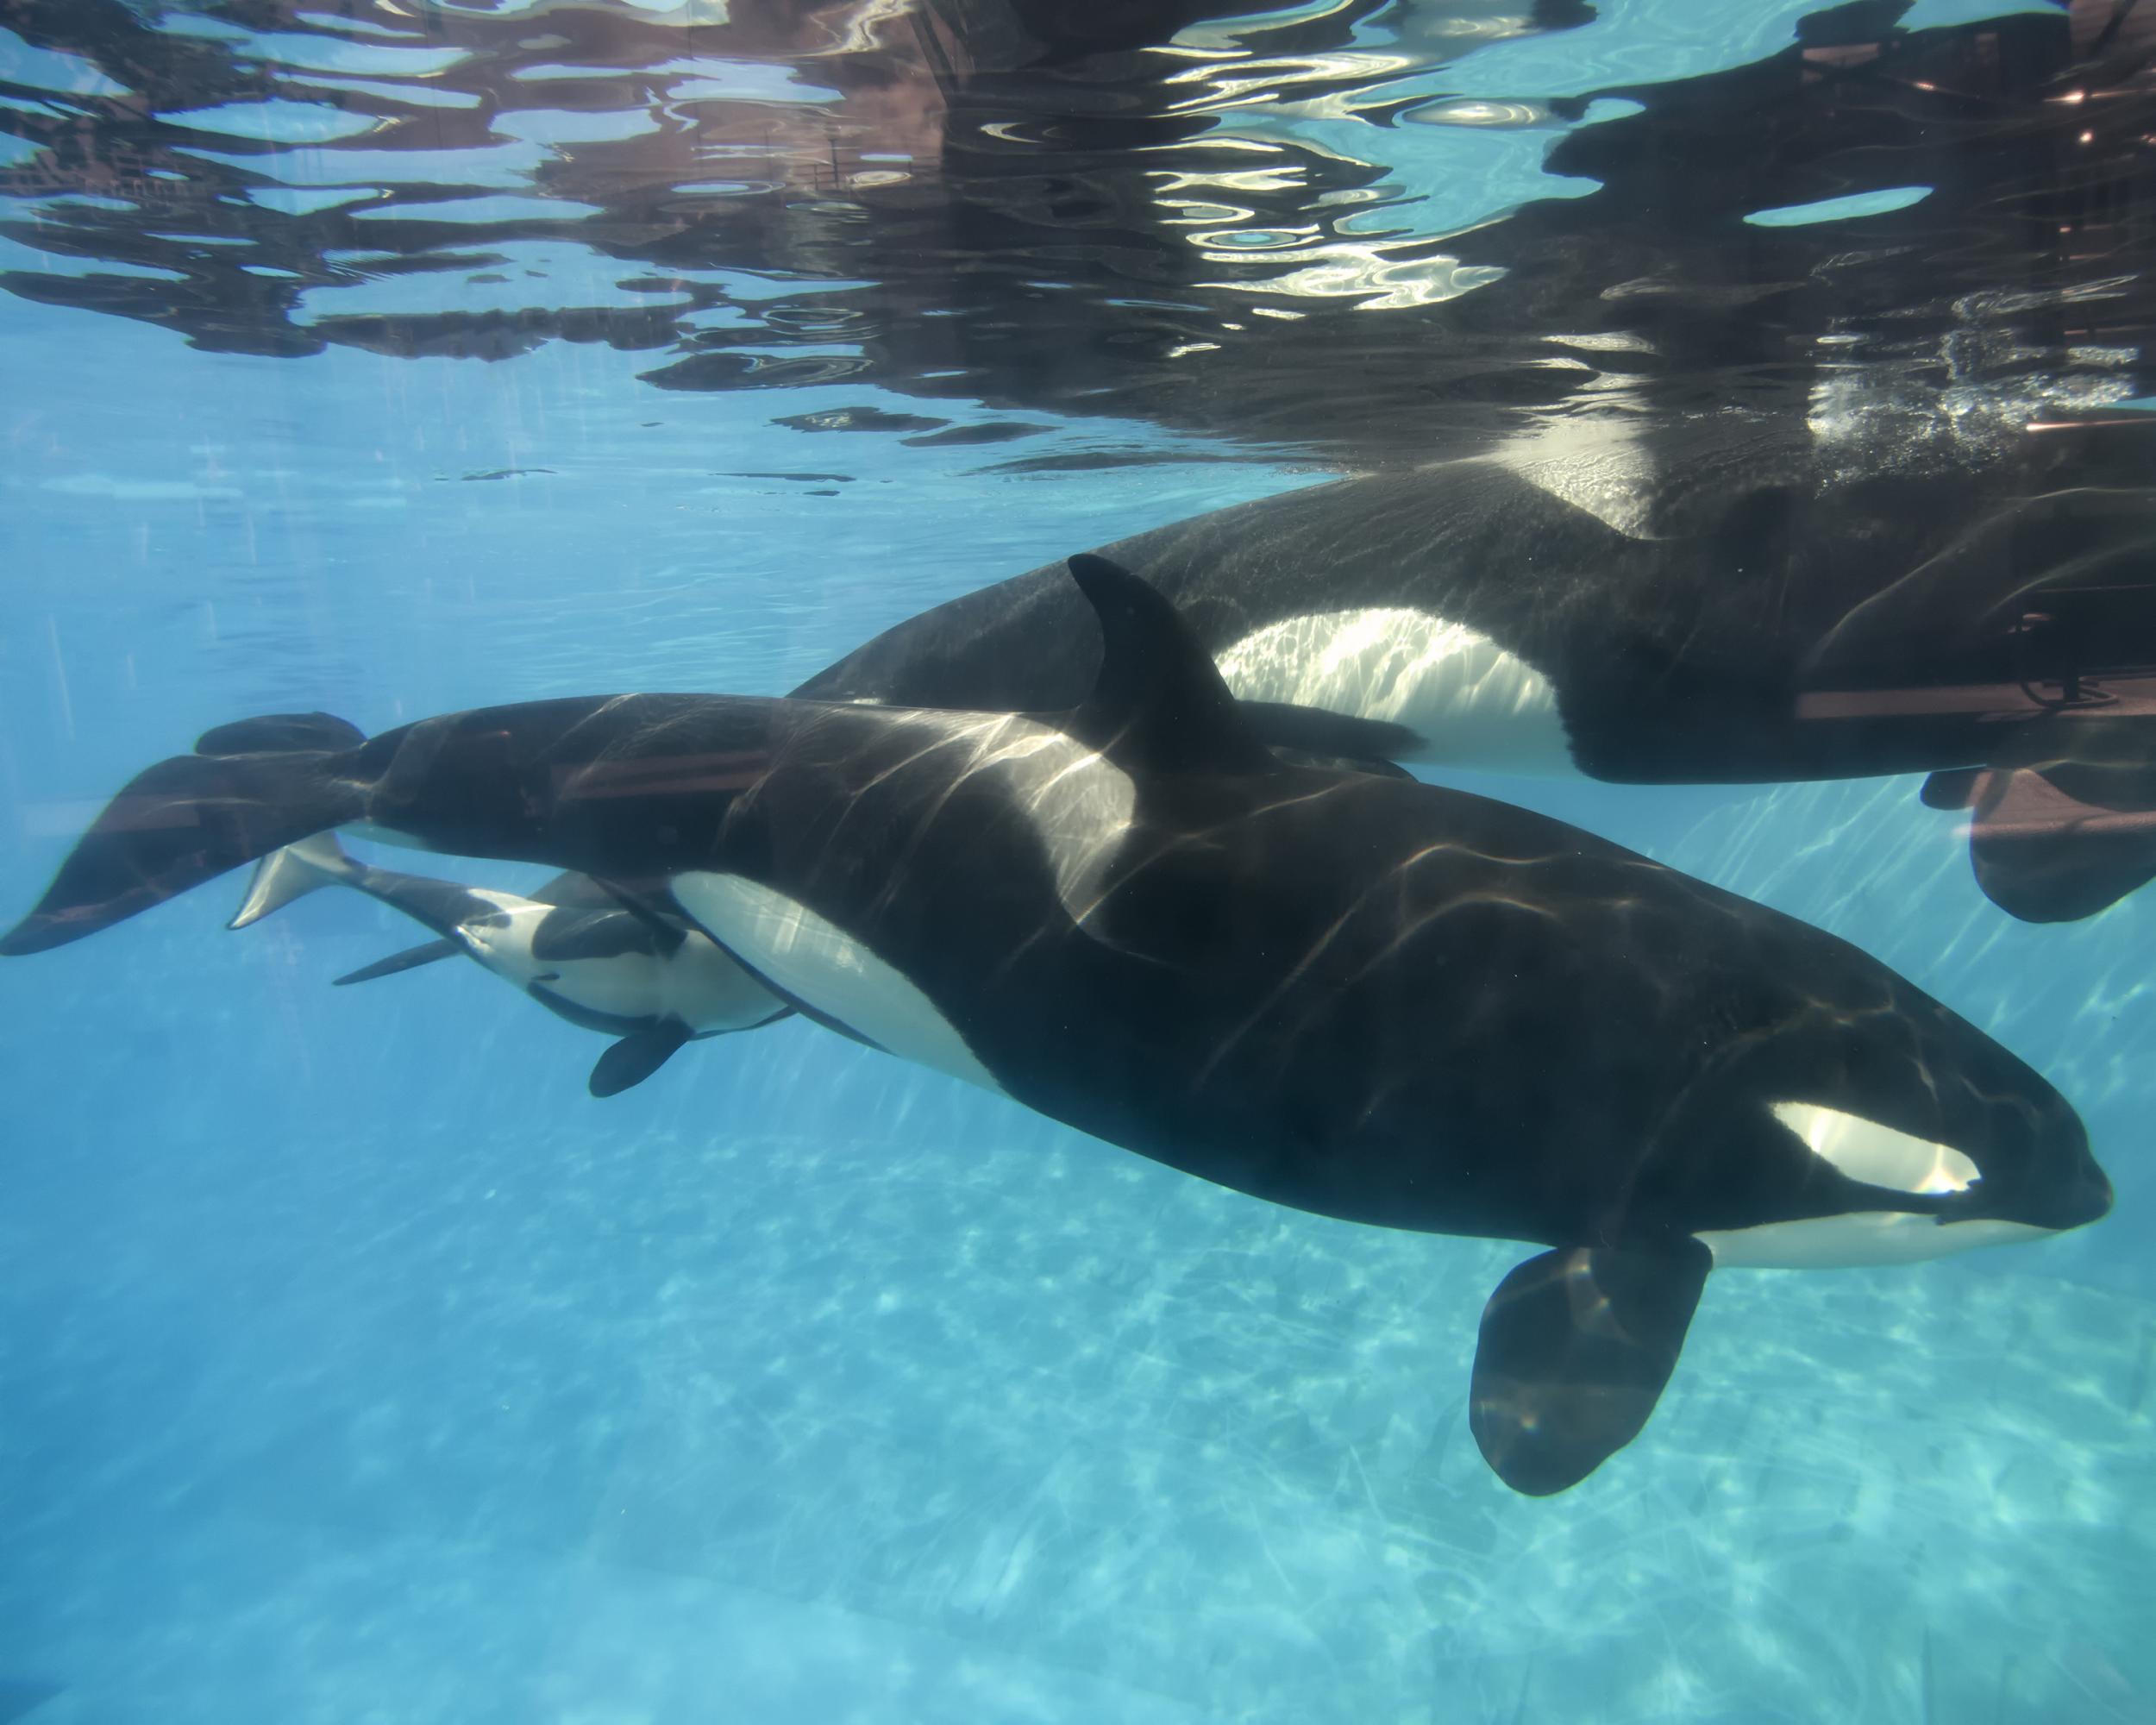 Kasatka died after a long battle with a bacterial infection